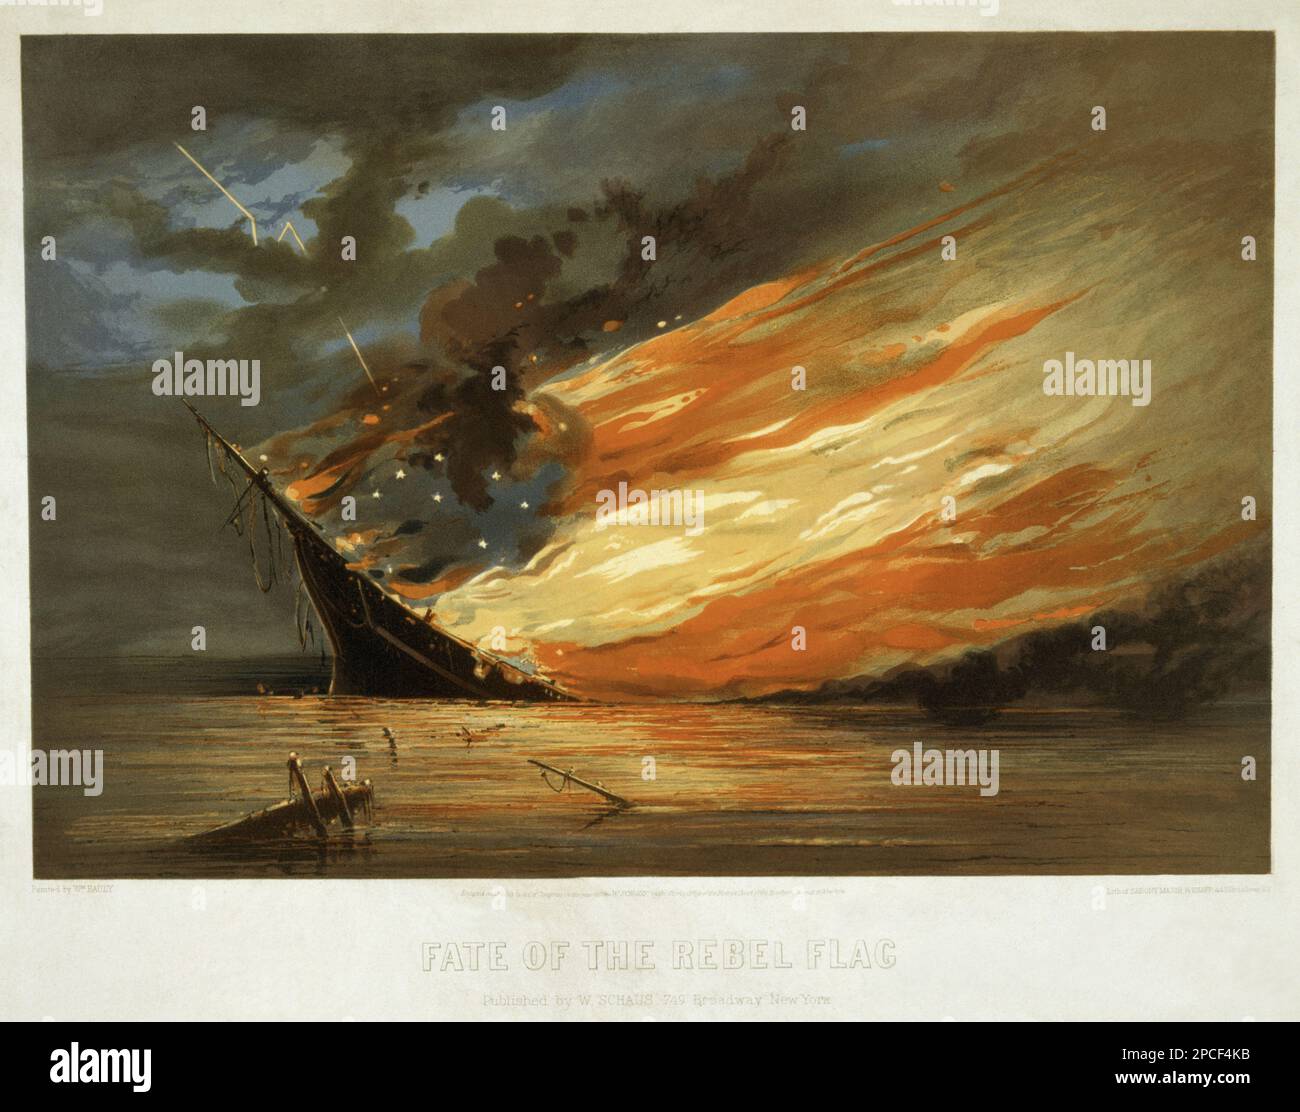 1861 , USA : 'Fate of the rebel Flag ' painted by artist William Bauly , lithography of Sarony, Major & Knapp, N.Y. A pro-Union patriotic print. In a spectacular nocturnal scene, a large warship sinks and burns on a calm sea littered with debris. The flames take on the configuration of the red, white, and blue flag of the Confederacy, the blue field with seven stars being formed by the night sky showing through the flames. Lightning strikes the flag from the upper left.  - SECESSION WAR  CIVIL - GUERRA CIVILE DI SECESSIONE AMERICANA   -   - USA  - nave - boat - navy - fuoco - fiamme - fire - n Stock Photo